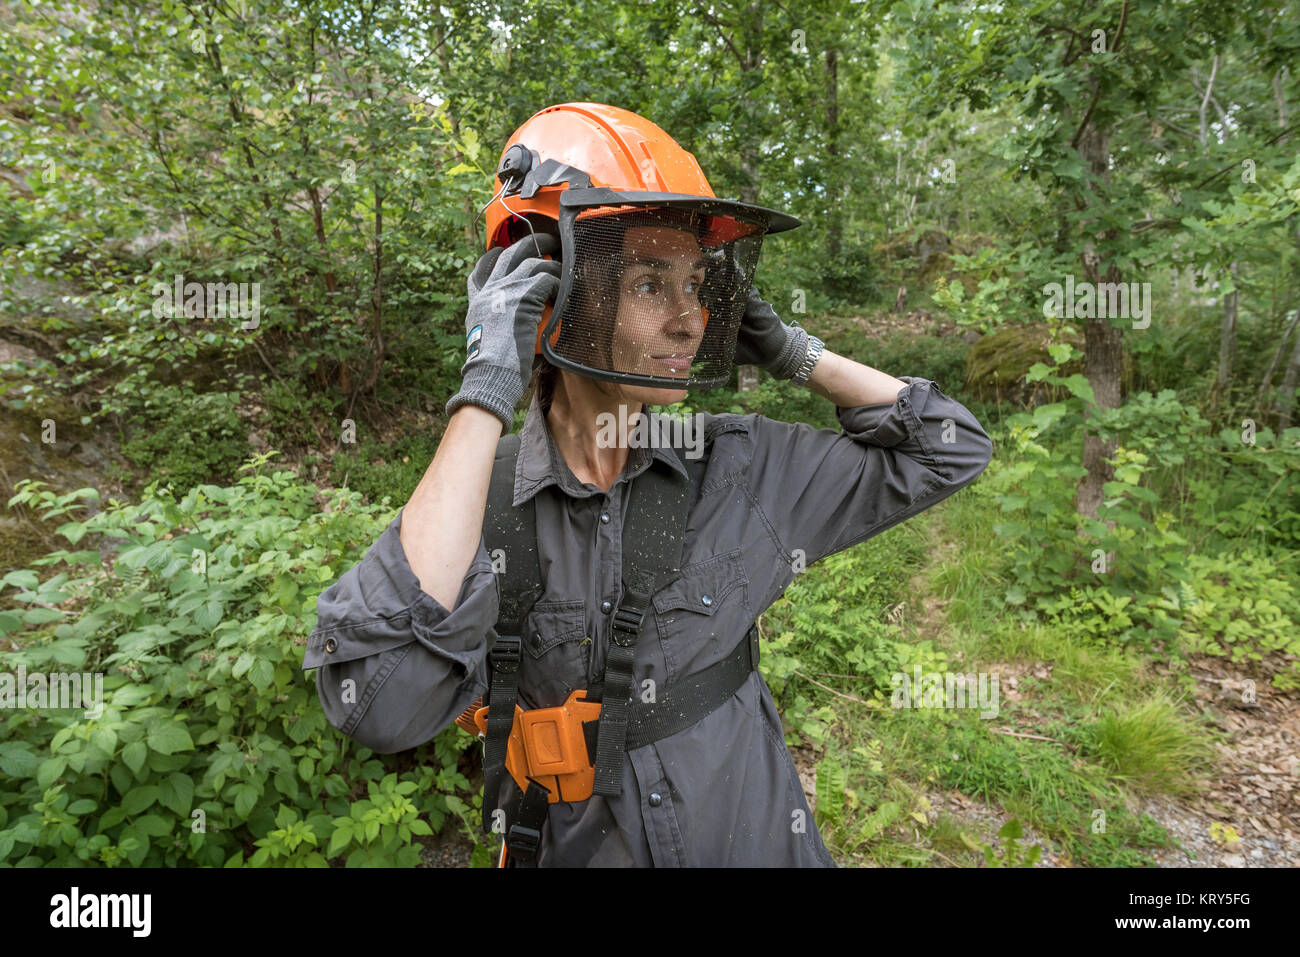 A woman wearing safety gear Stock Photo